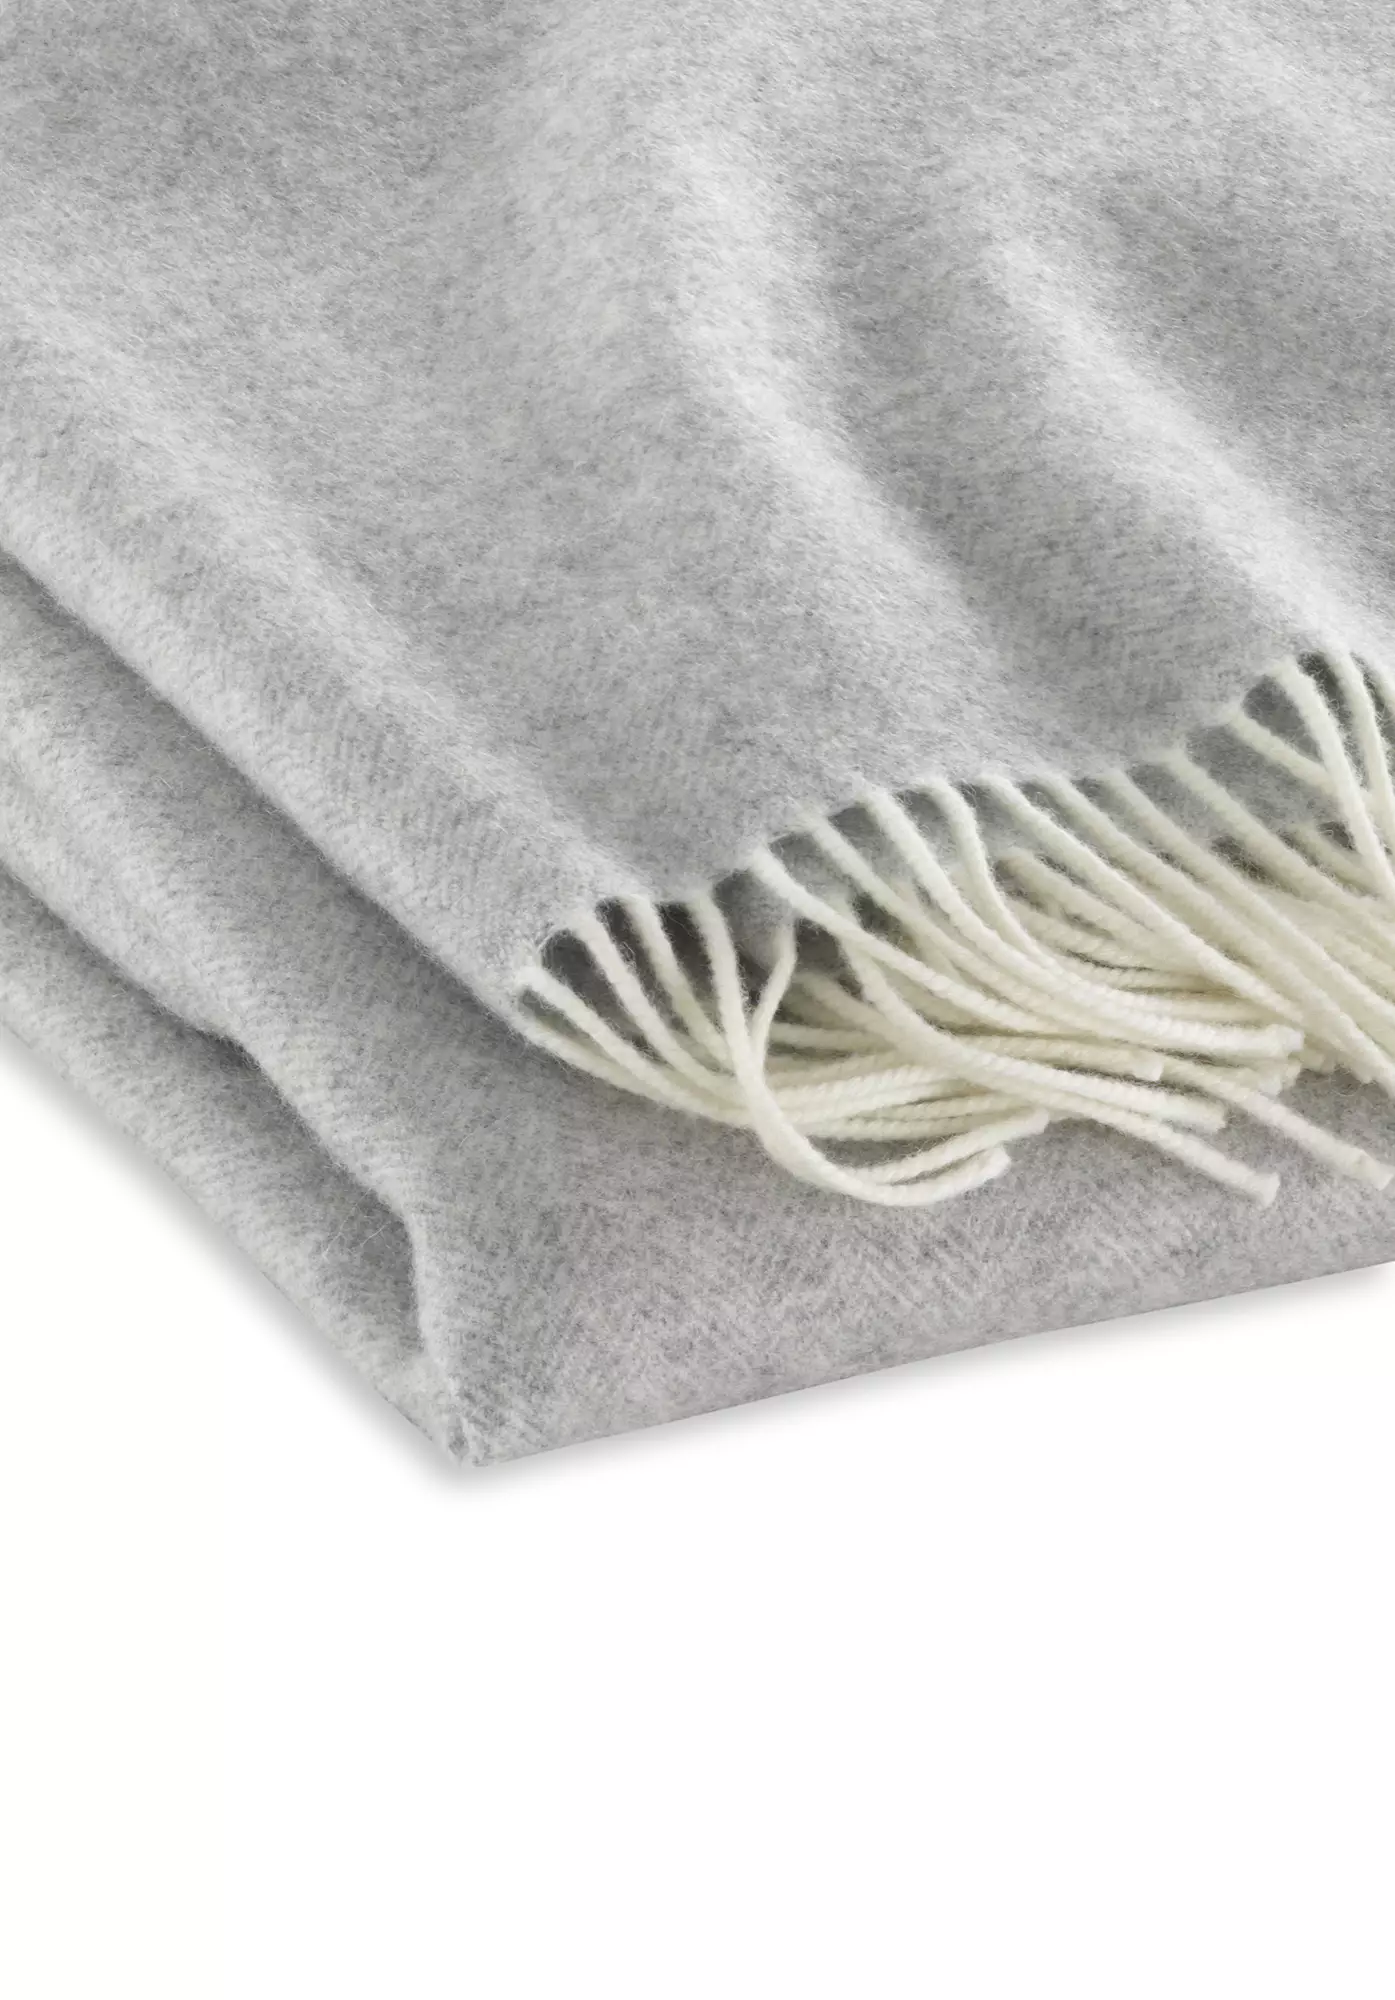 DAVOS blanket made of cashmere and merino wool - 2